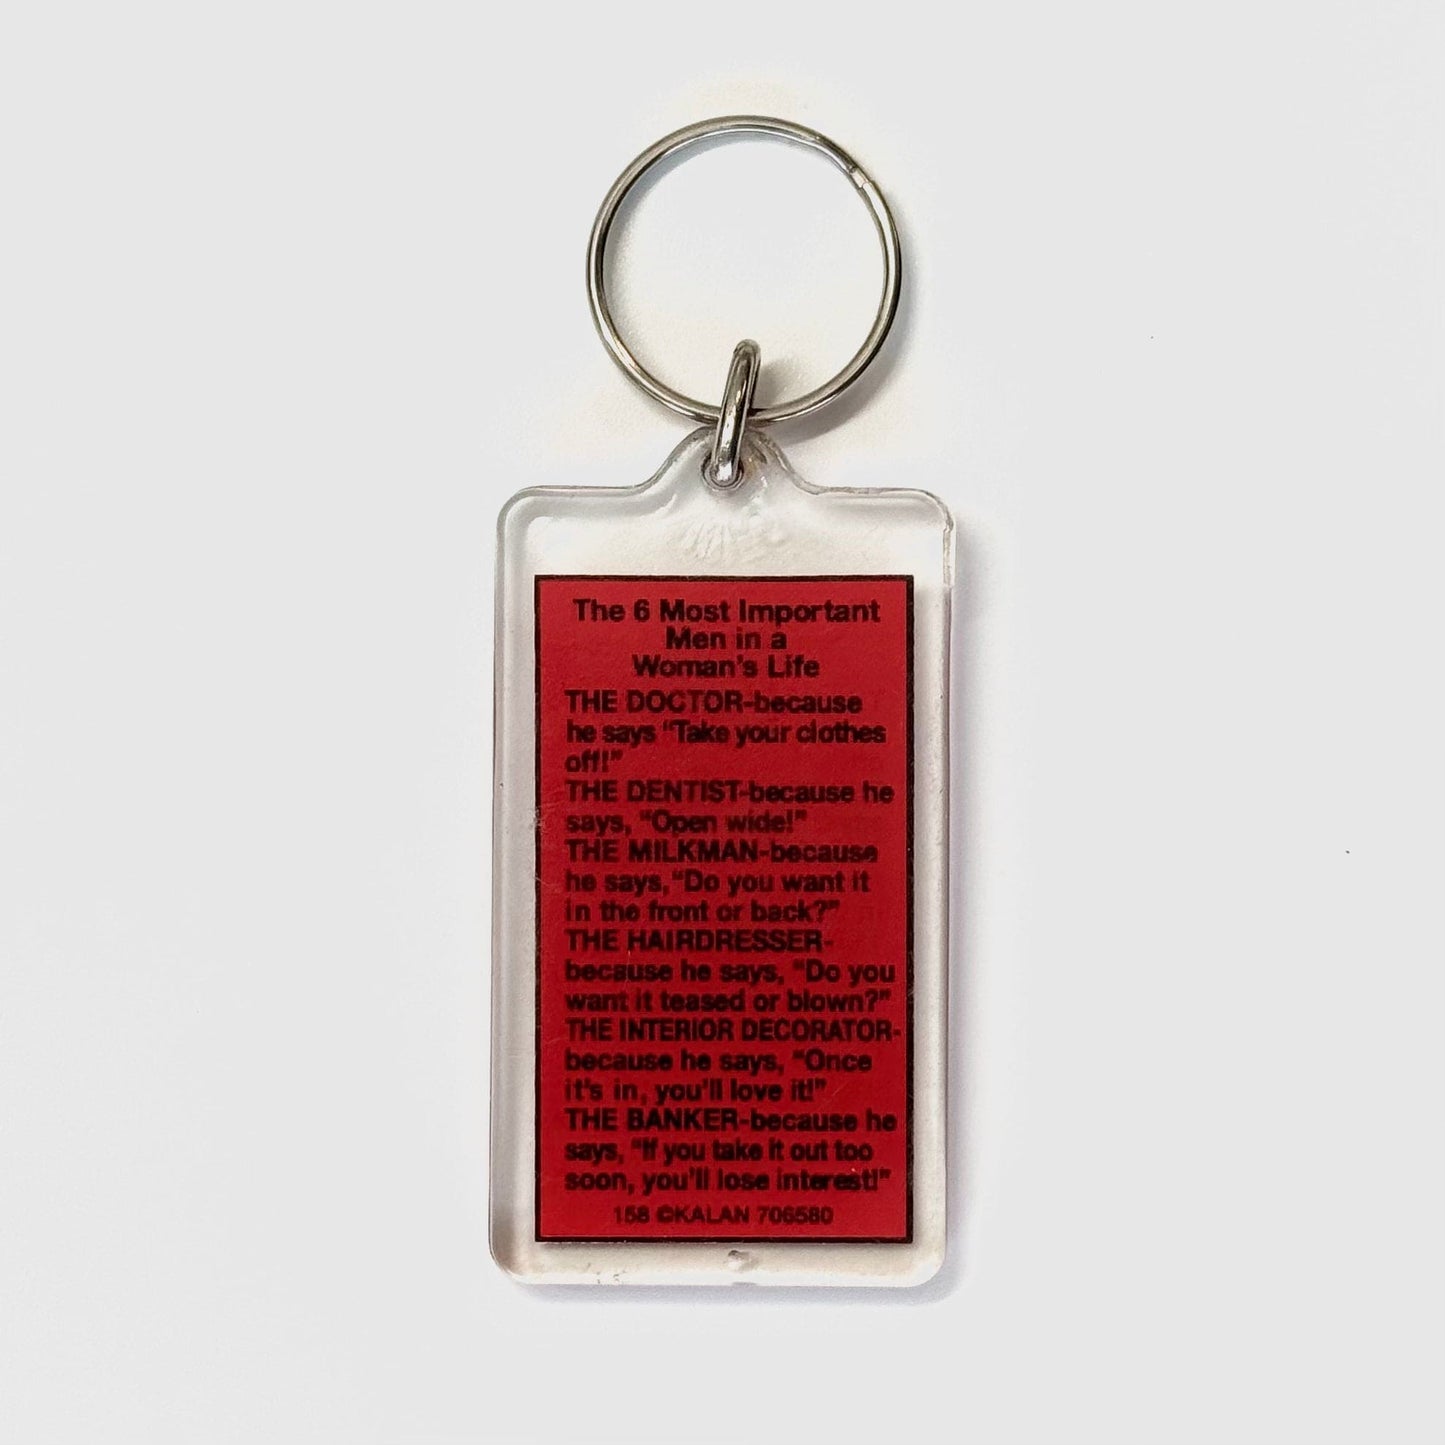 Vintage Novelty Adult Humor Keychain ‘Important Men in a Womens Life’ Key Ring Clear Acrylic